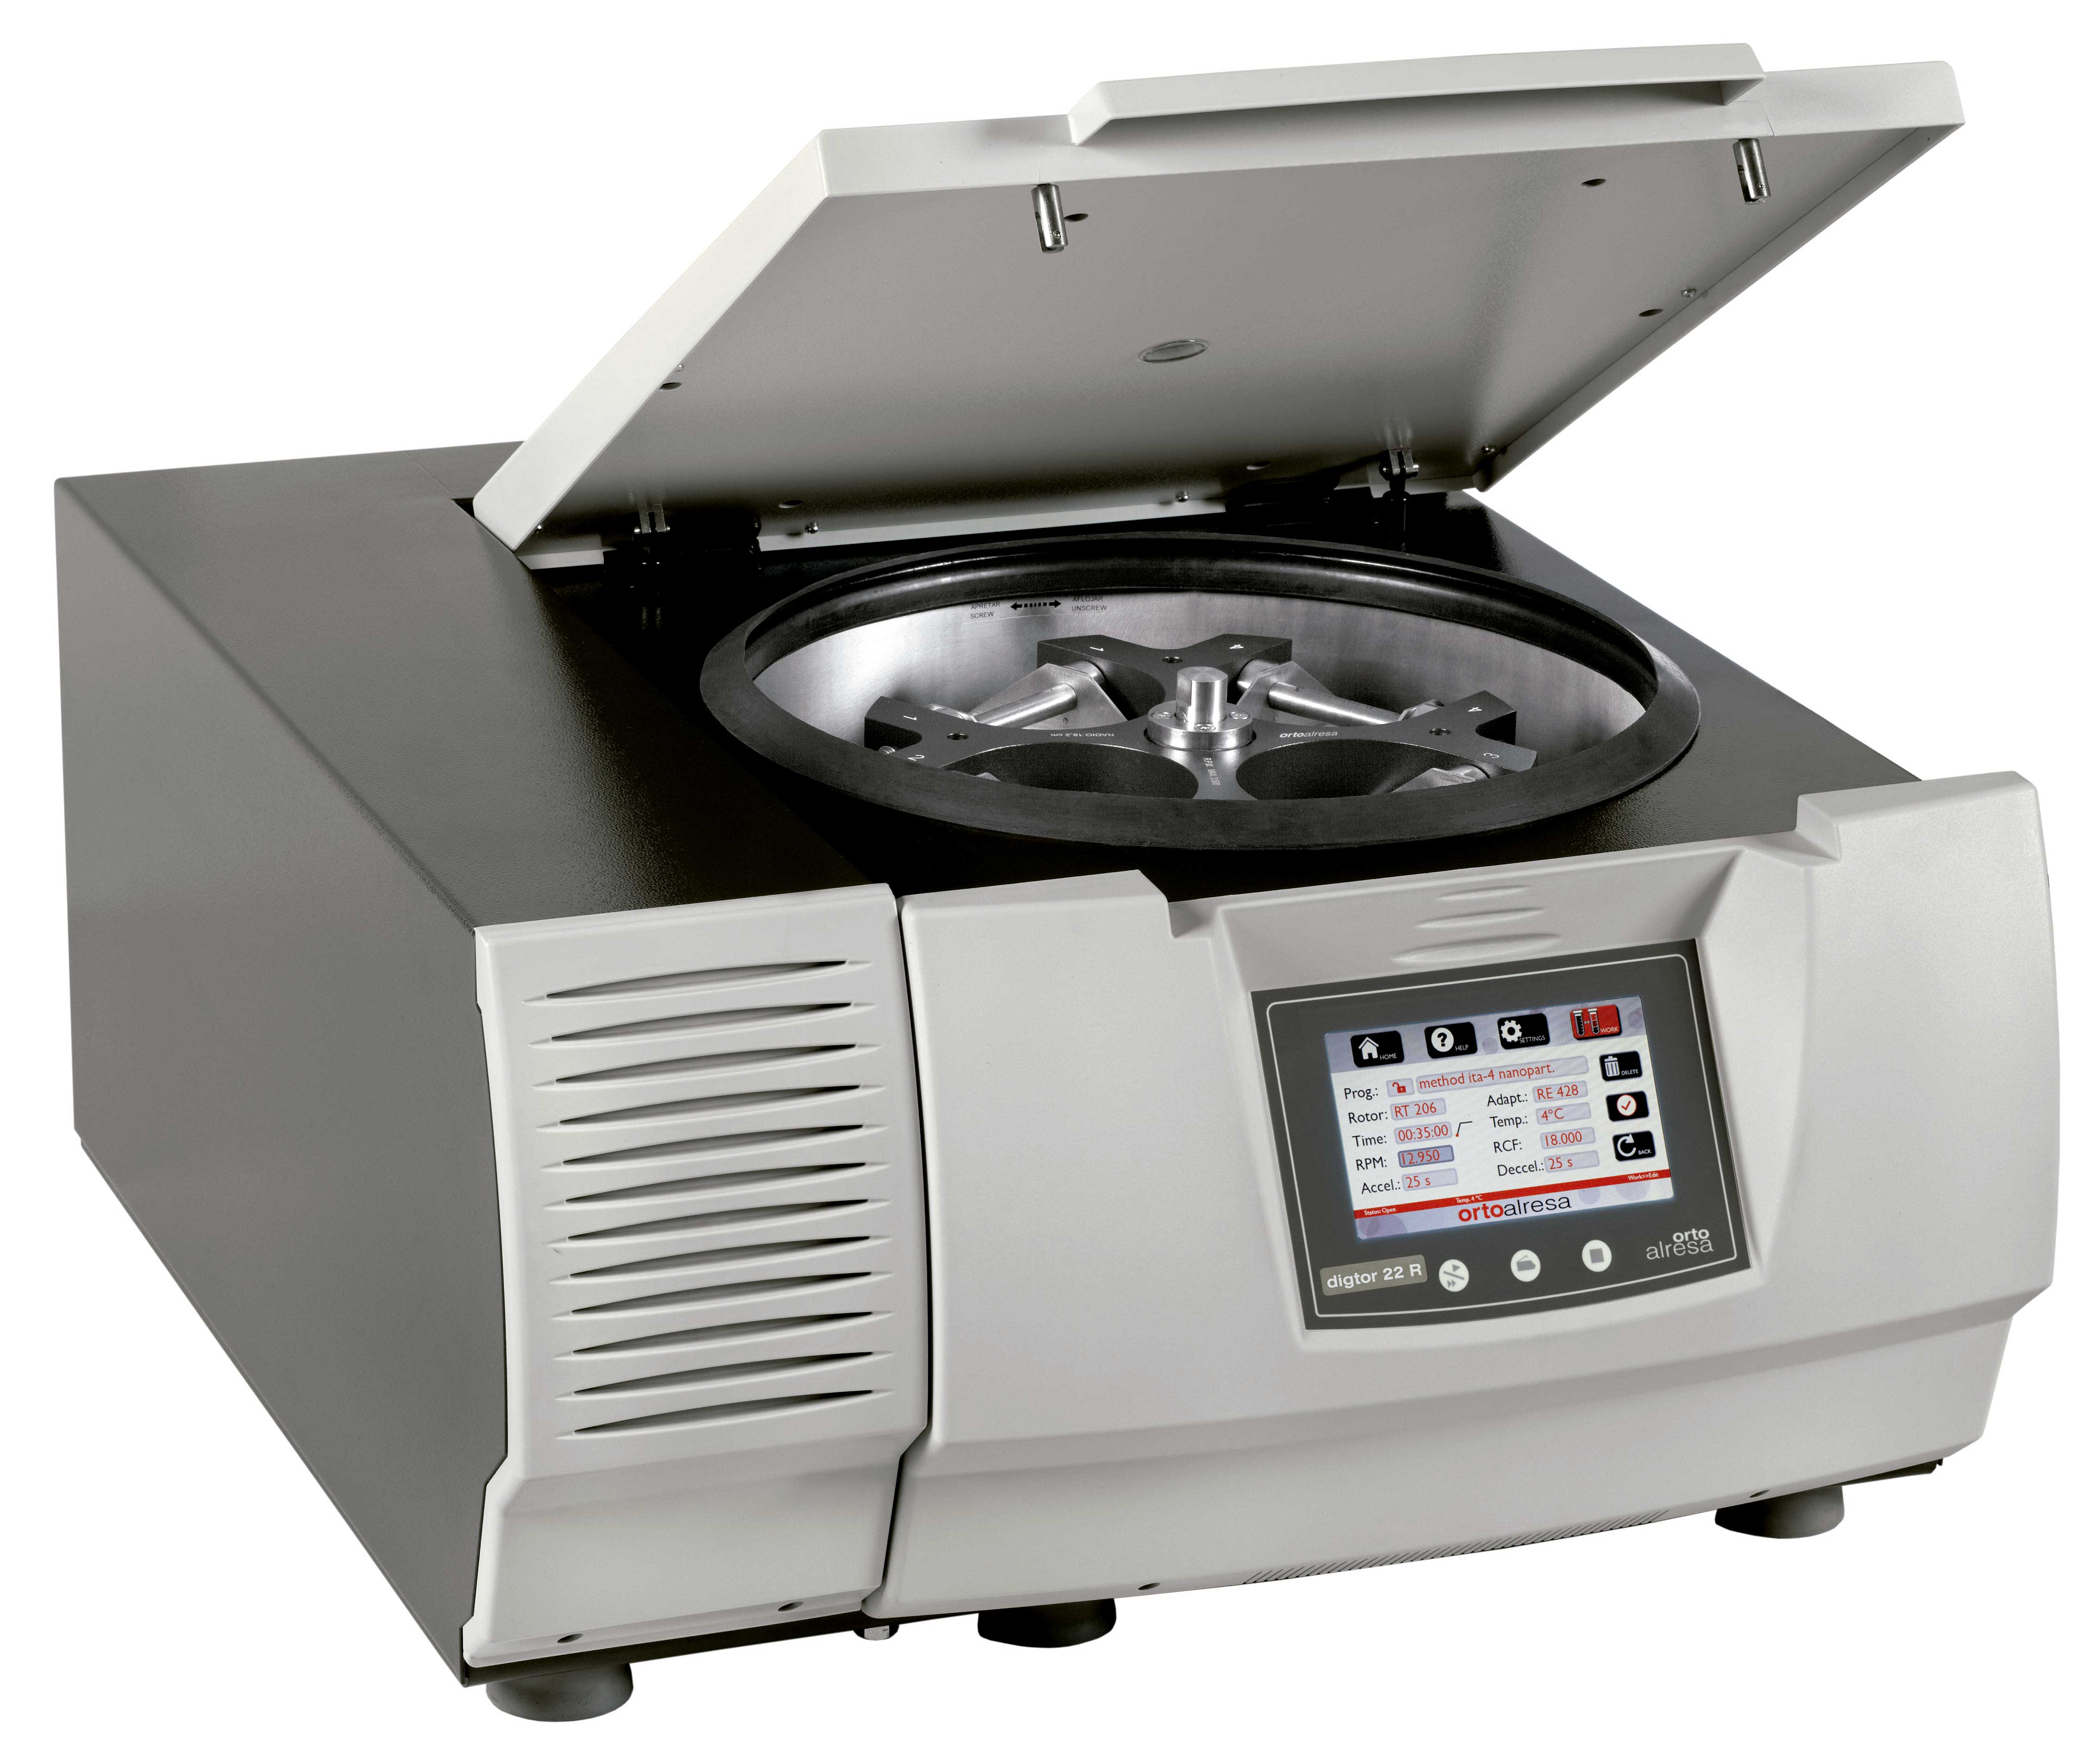 Centrifuge Digtor 22/22R. ORTOALRESA. Centrifuge (rotor not included). Model: Digtor 22 R. Refrigerated: Yes. Dim. WxHxD (mm): 805x390x720. Weight (Kg): 95. Voltage (V): 220-230. Frequency (Hz): 50-60. Consumption (W): 1050